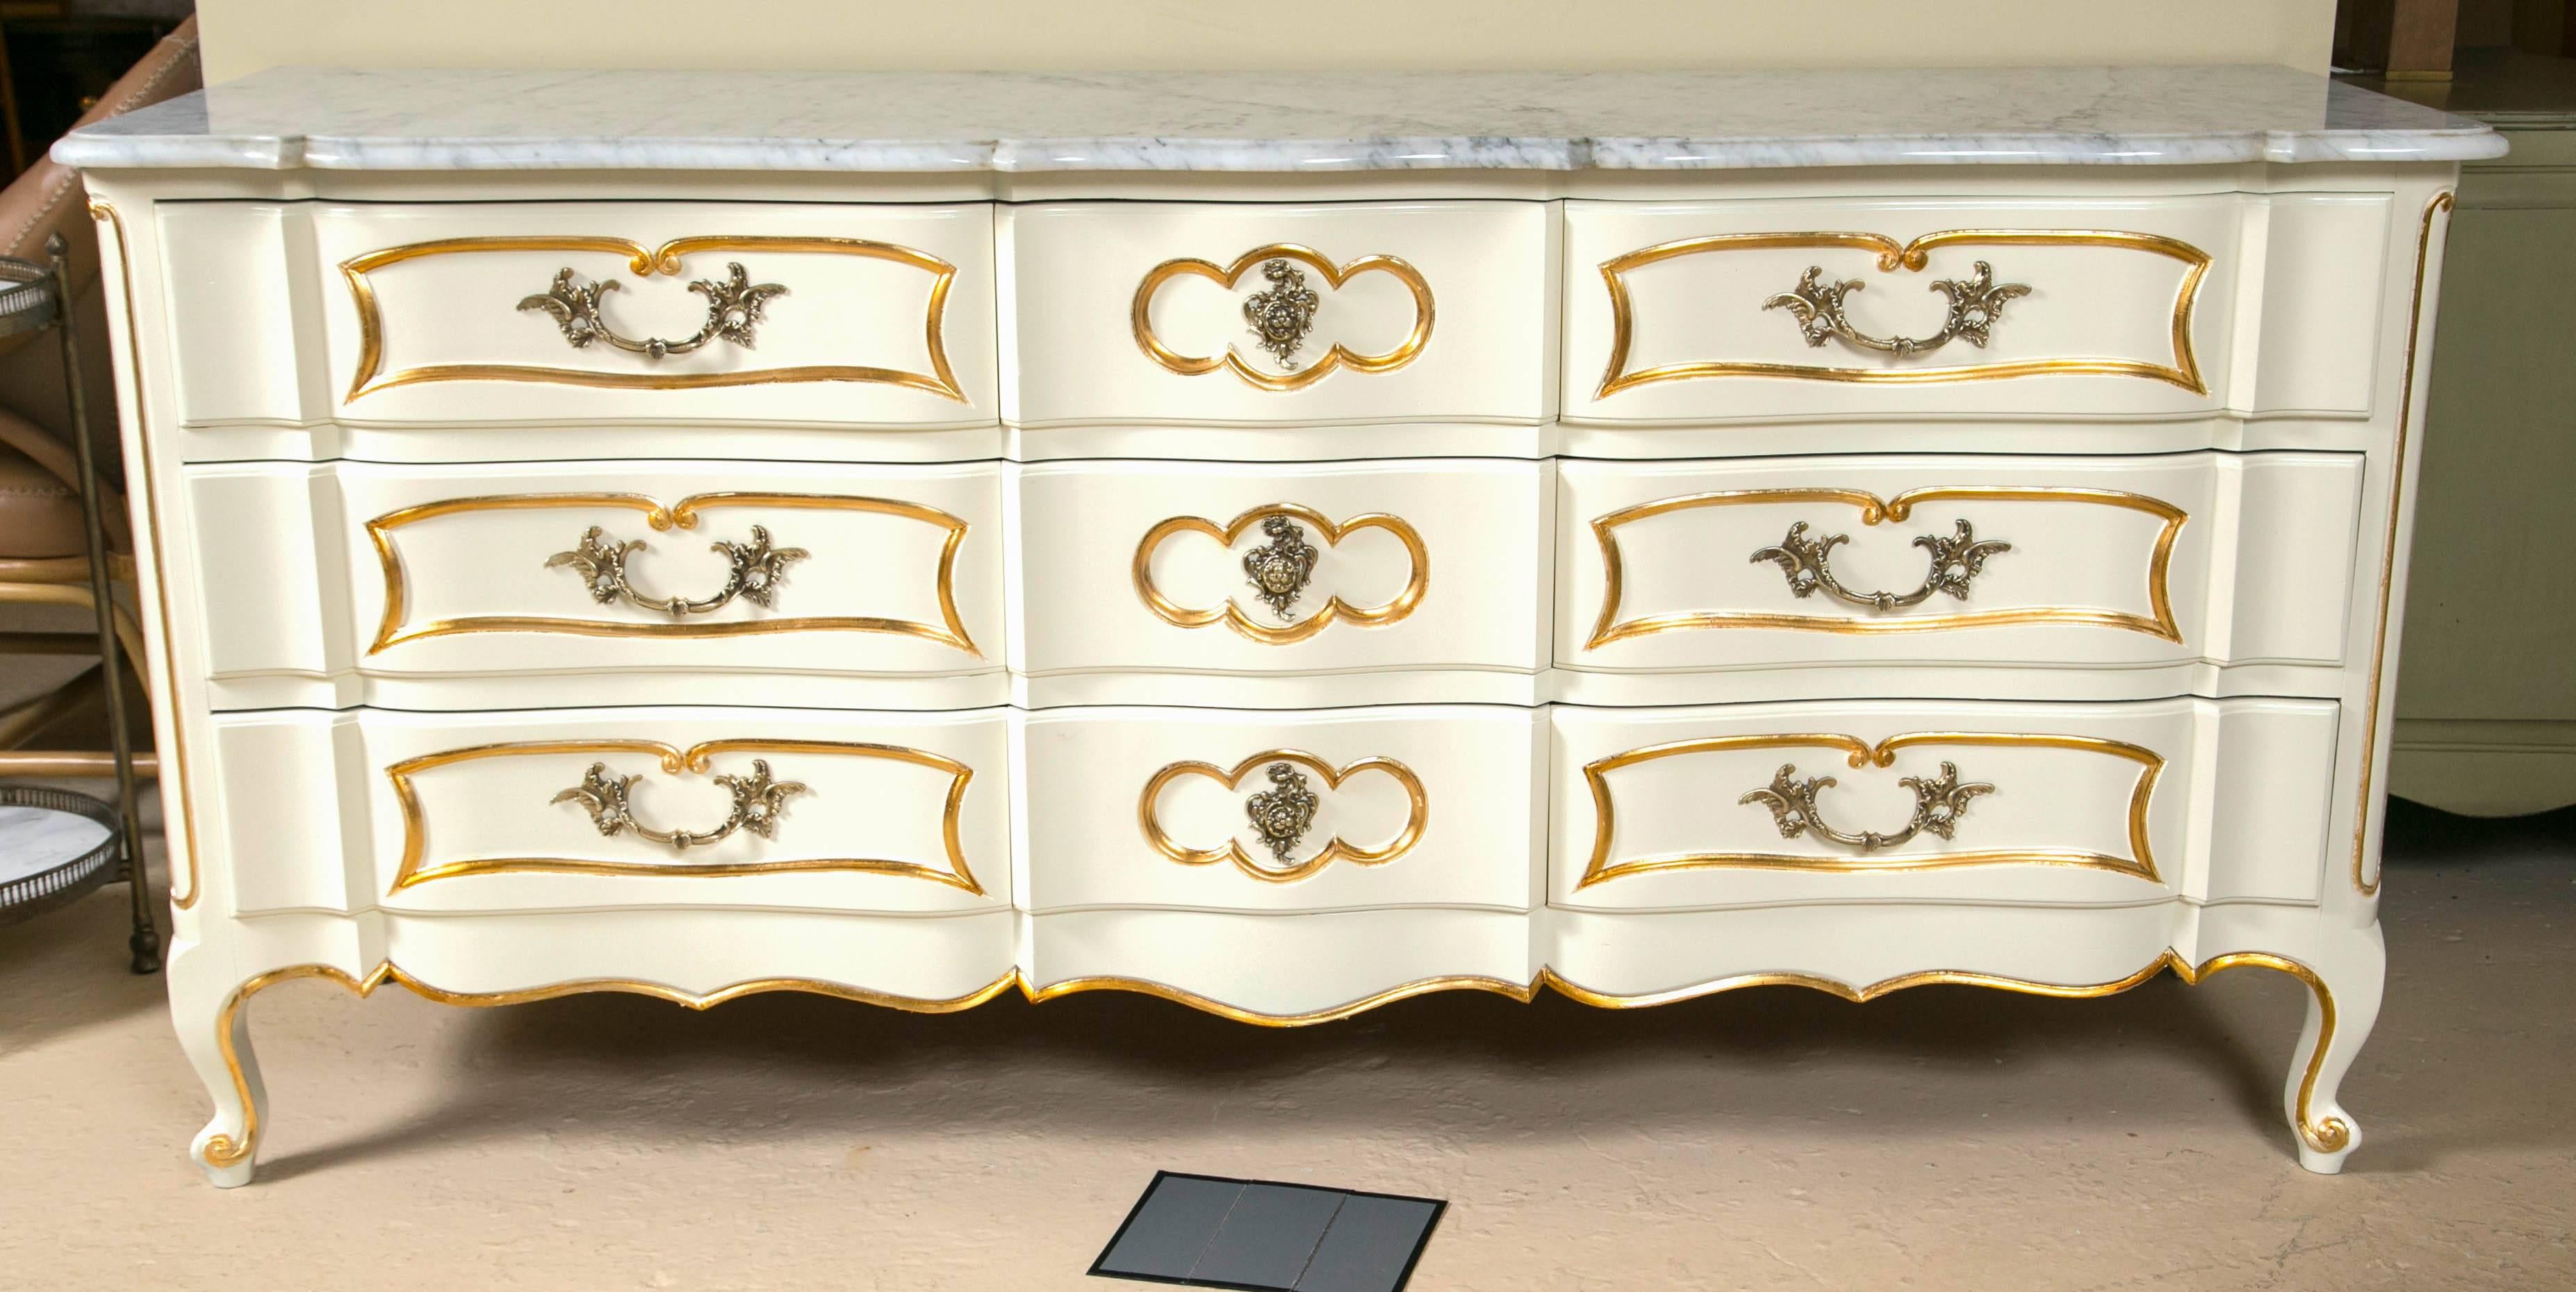 Louis XV style marble top painted and gilt decorated dresser commode. This fabulous nine-drawer dresser has an oak secondary case in the Louis XV style that has been primed and finely painted. The three center small drawers flanked by wider deep